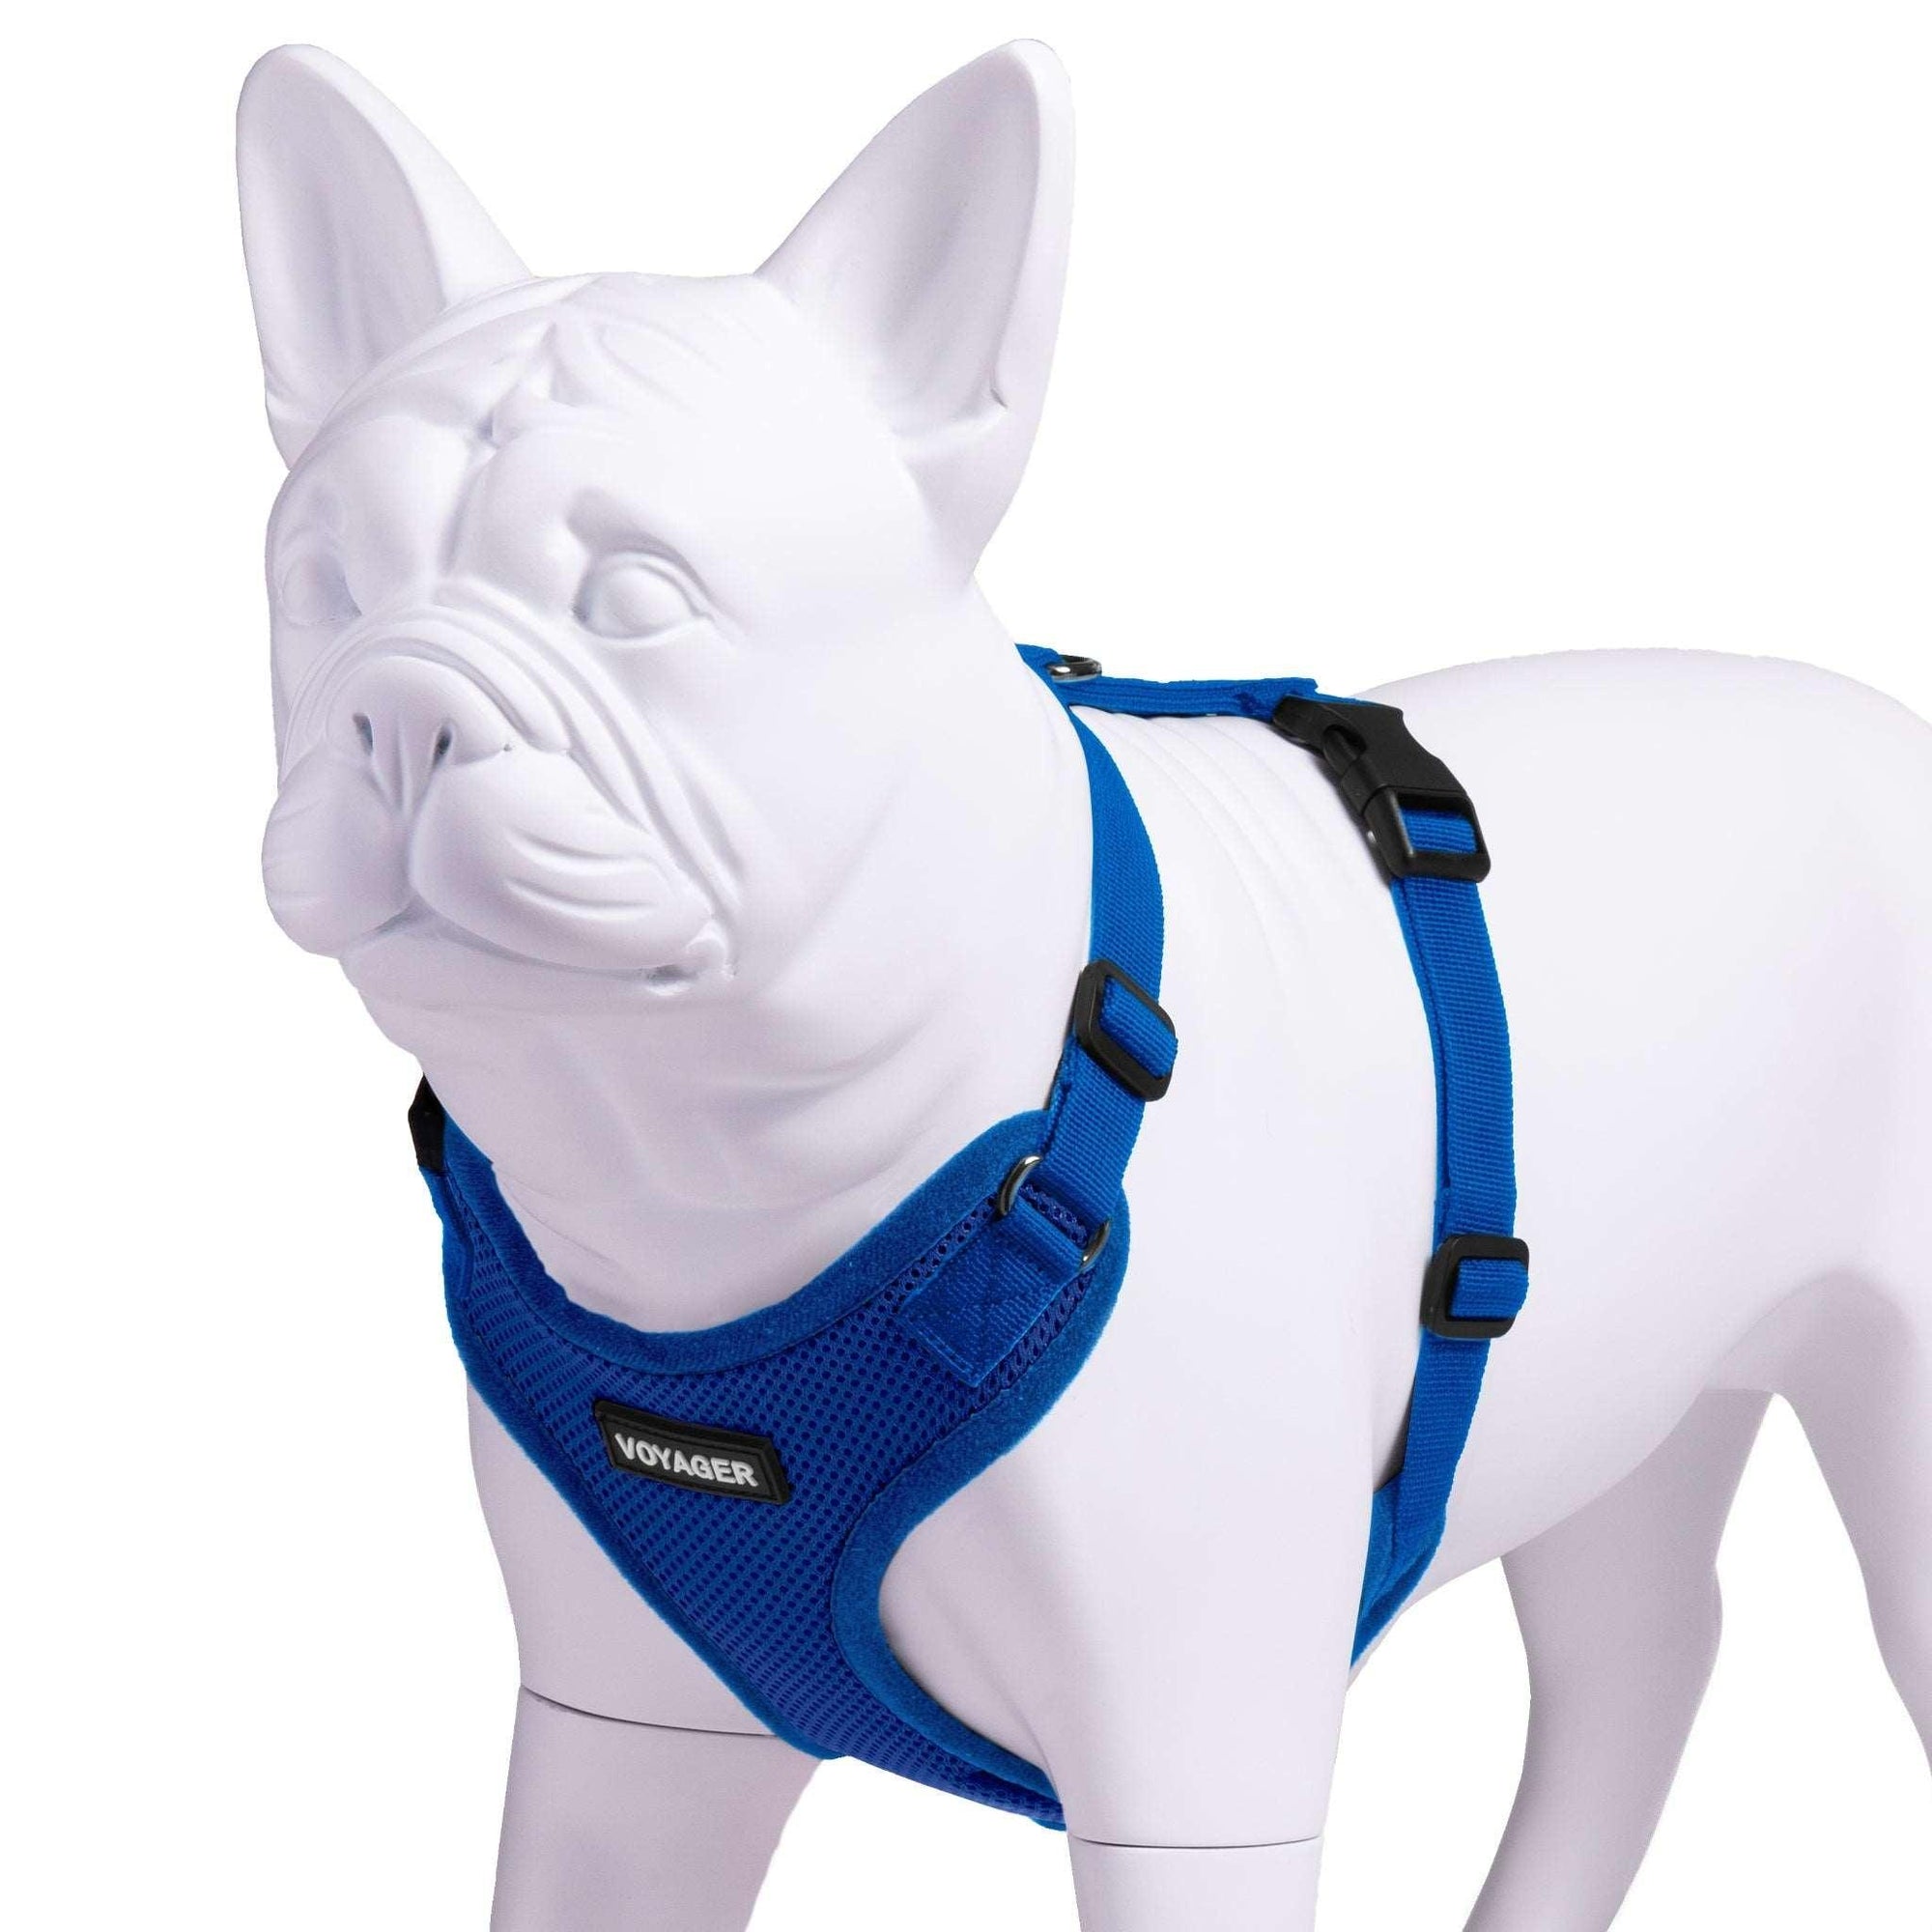 VOYAGER Step-In Lock Dog Harness in Royal Blue with Matching Trim and Webbing - Expanded